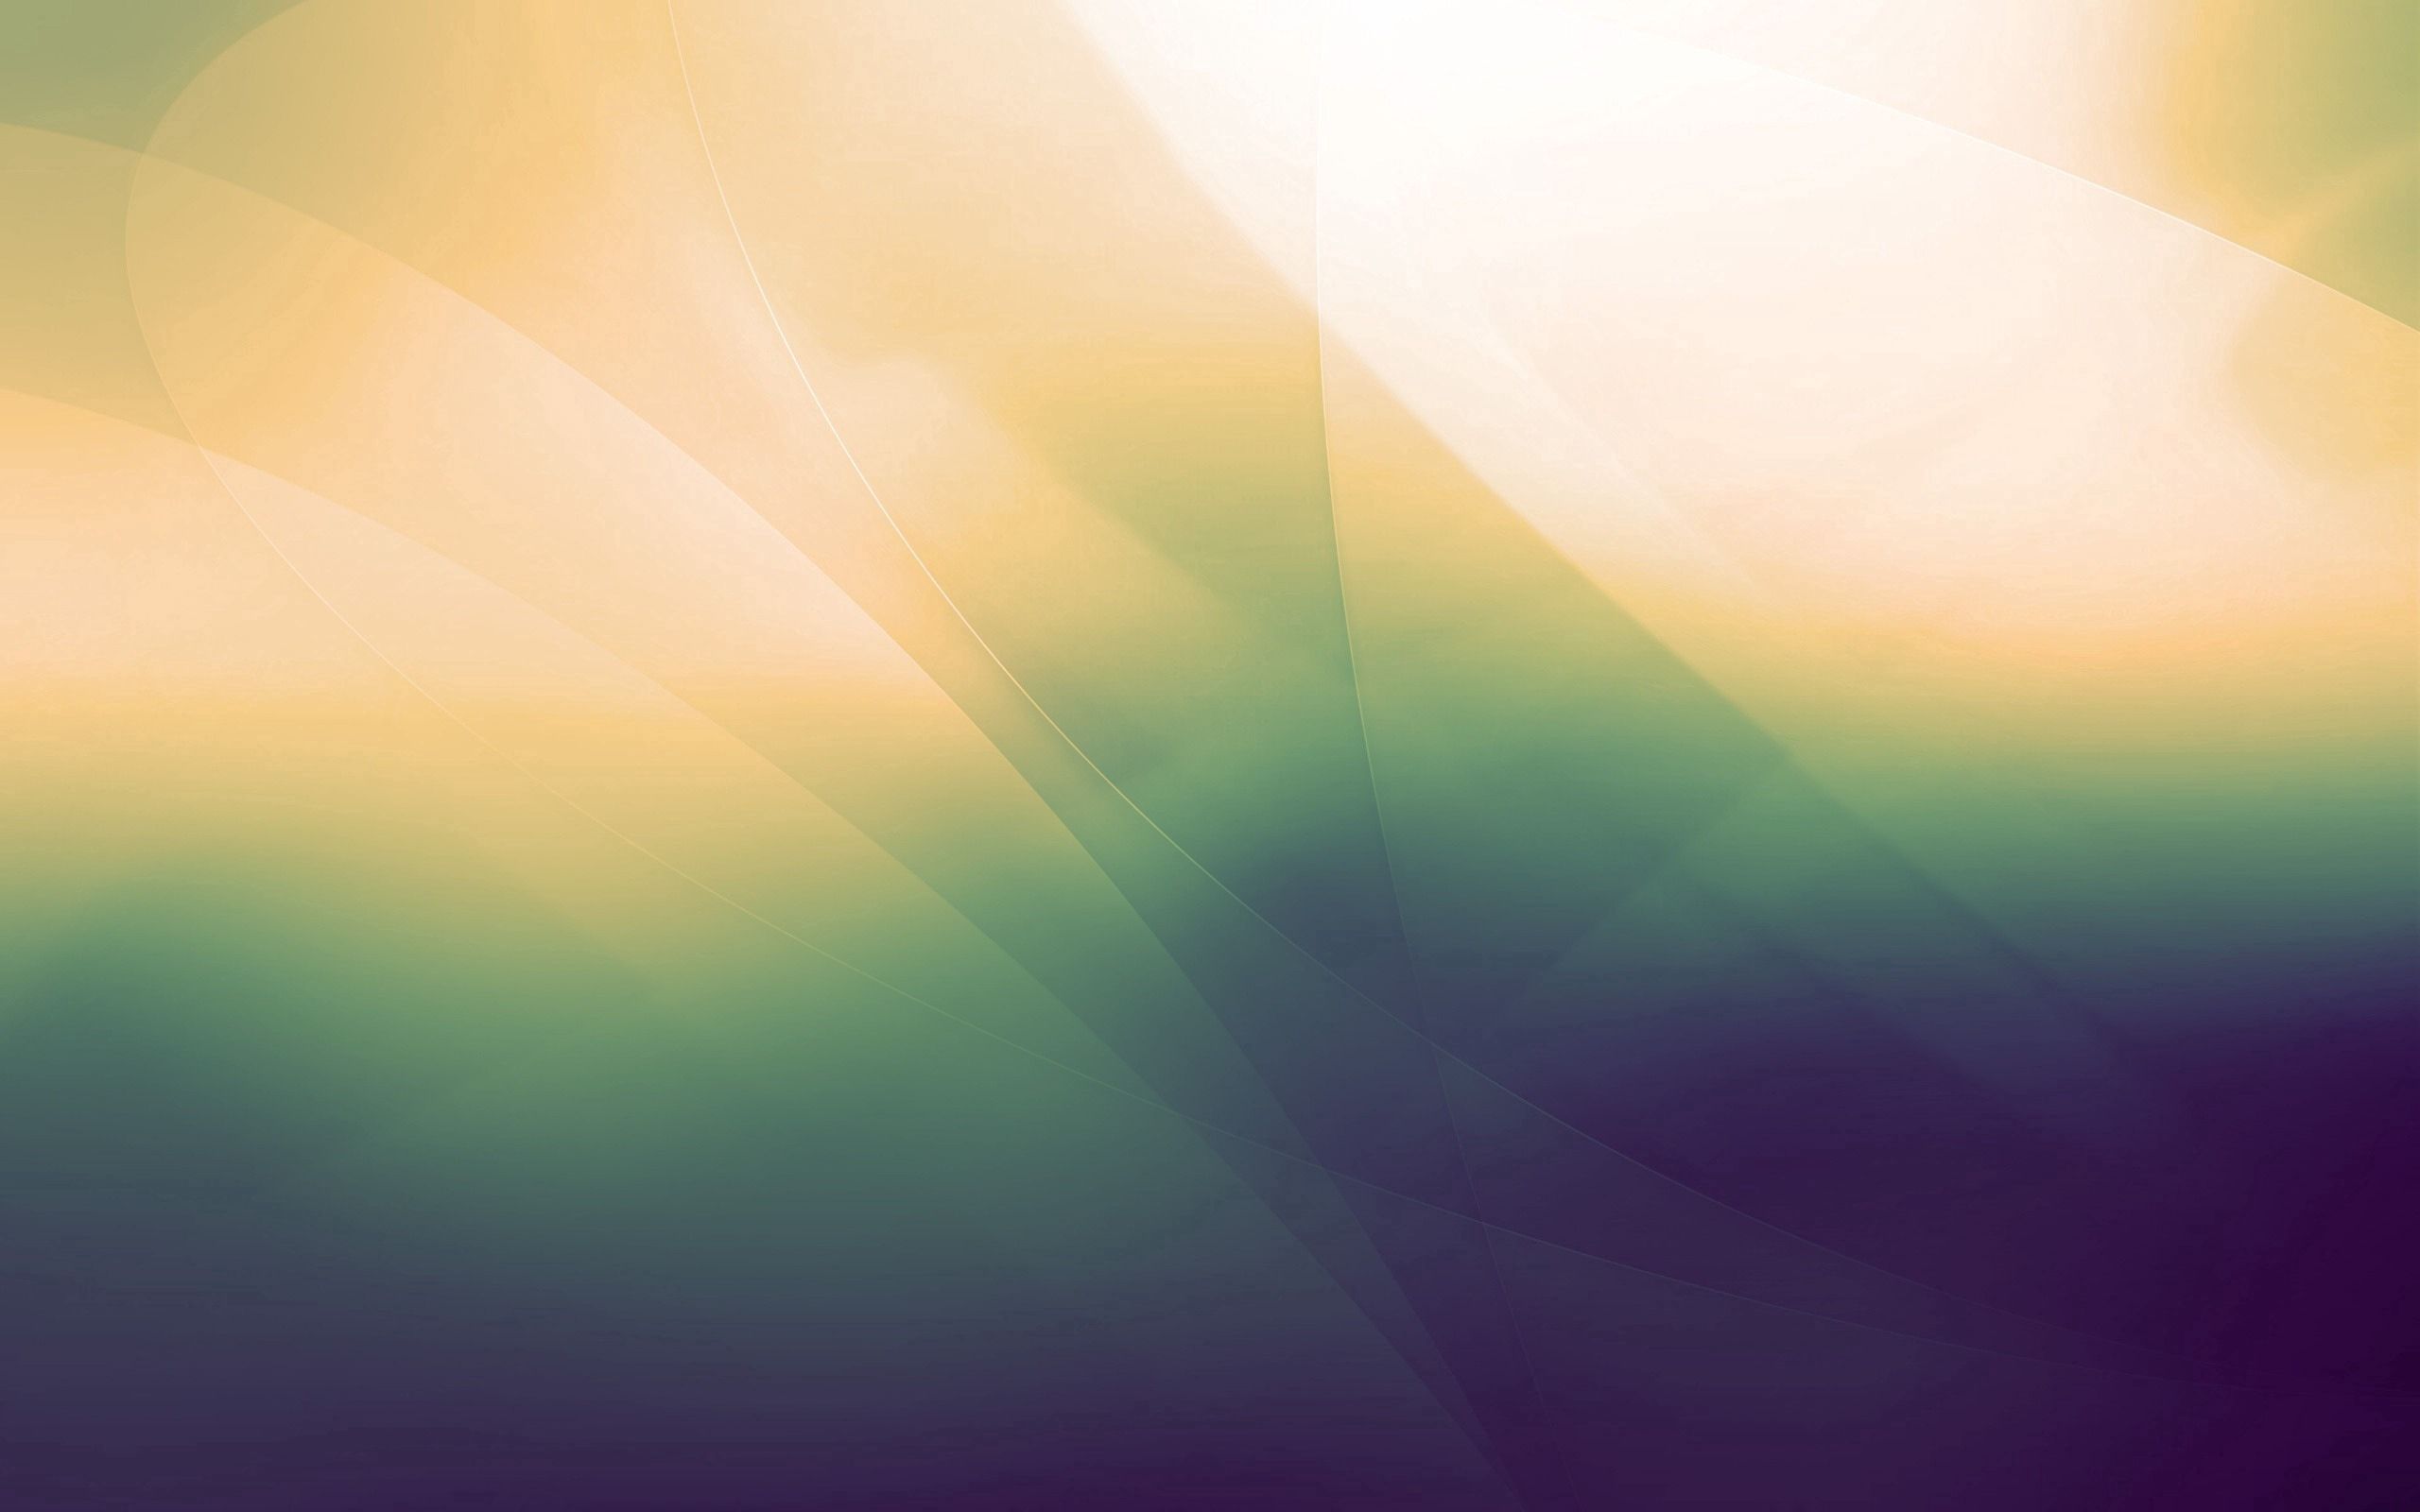 faded, abstract, shine, light, blur, smooth, paints 1080p